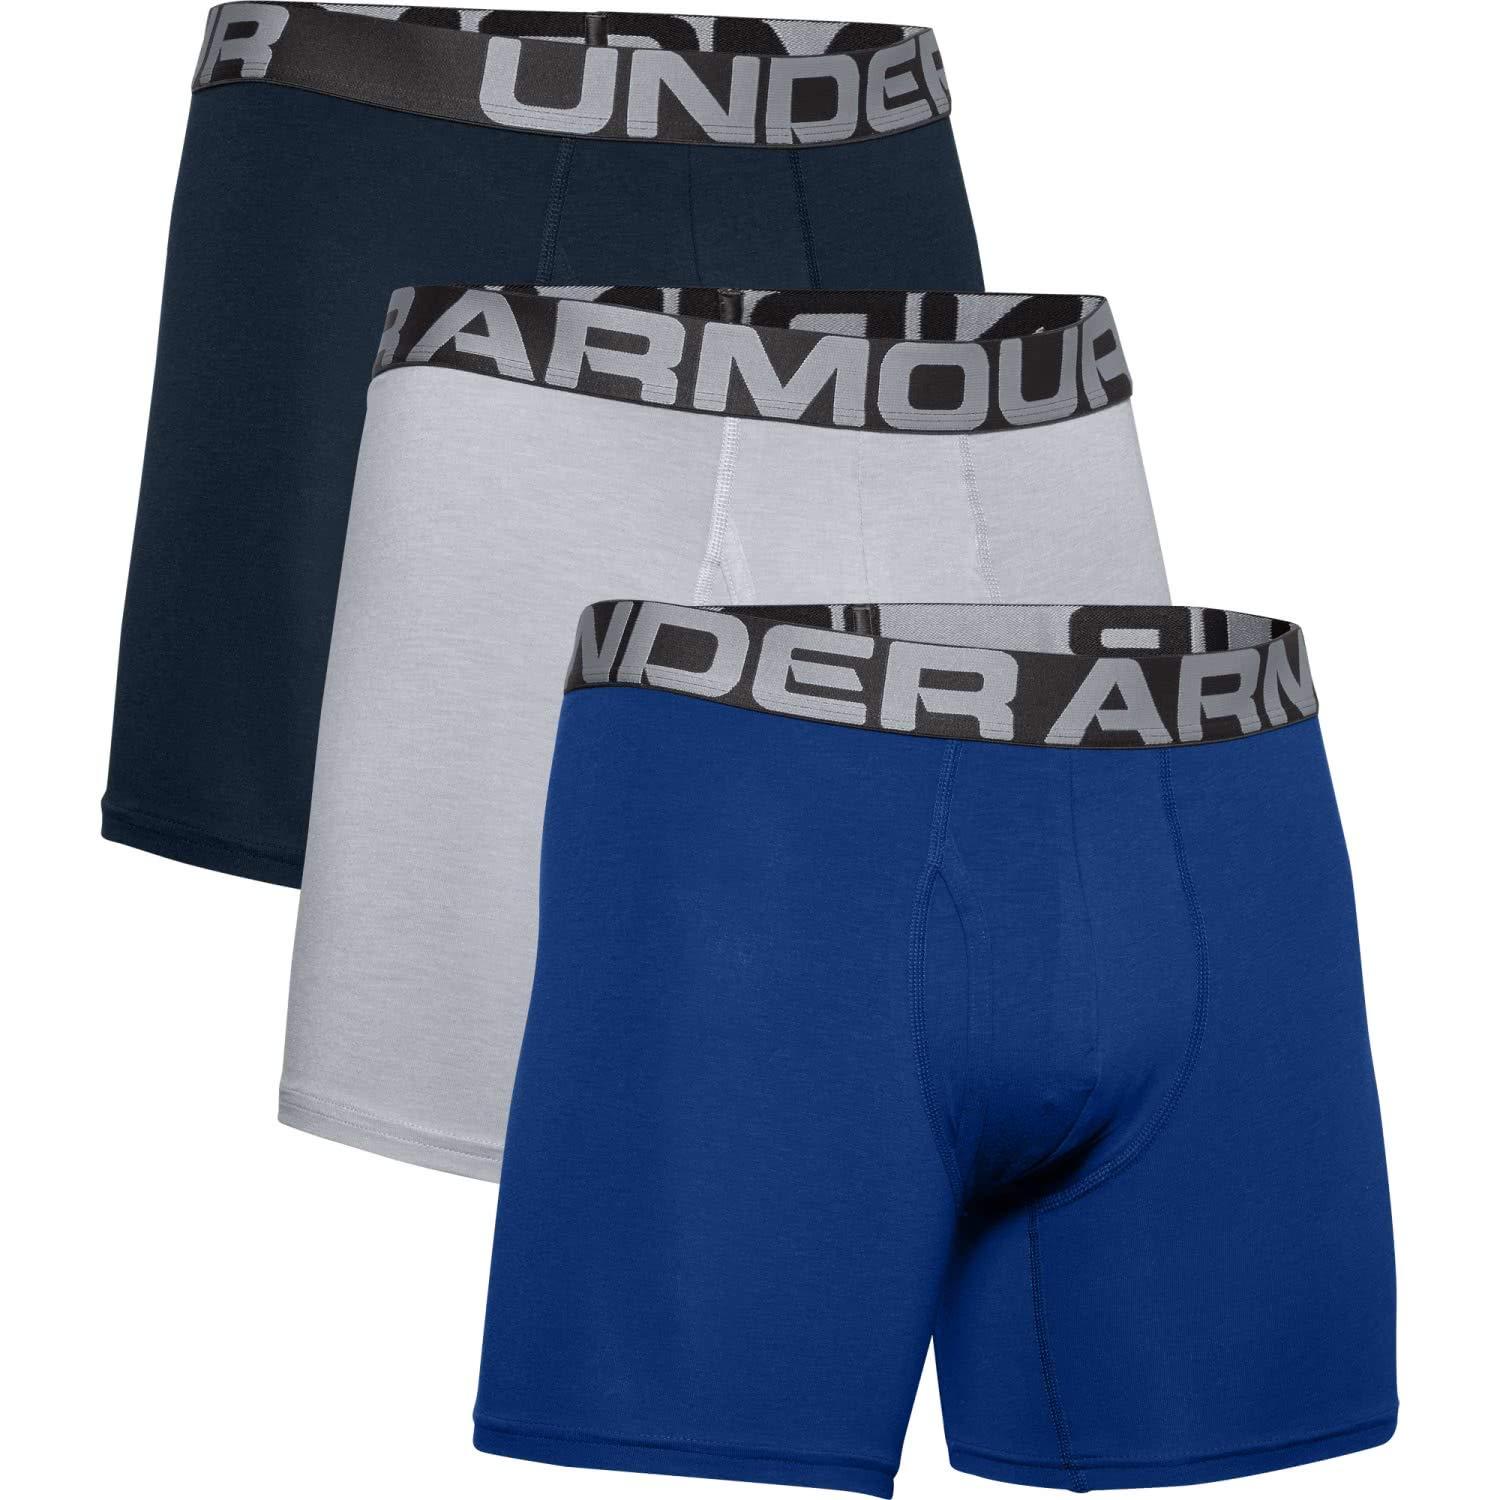 Under Armour UA Charged Cotton 6in 3 Pack-1363617-400 - Royal/Academy/Mod  Gray Medium Heather - 5XL